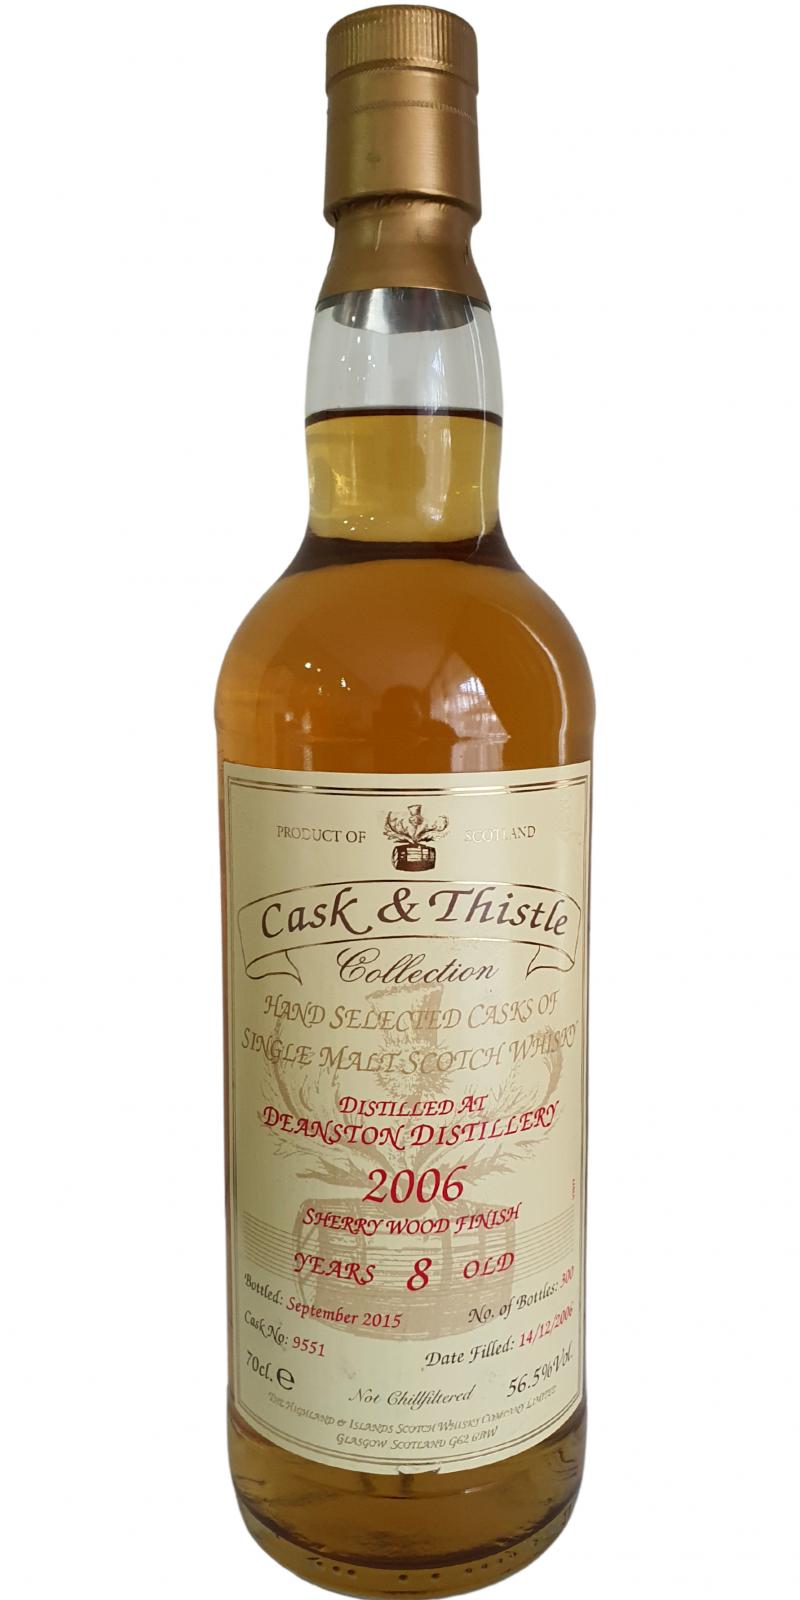 Deanston 2006 H&I Cask & Thistle Collection Sherry Wood Finish 9551 56.5% 700ml